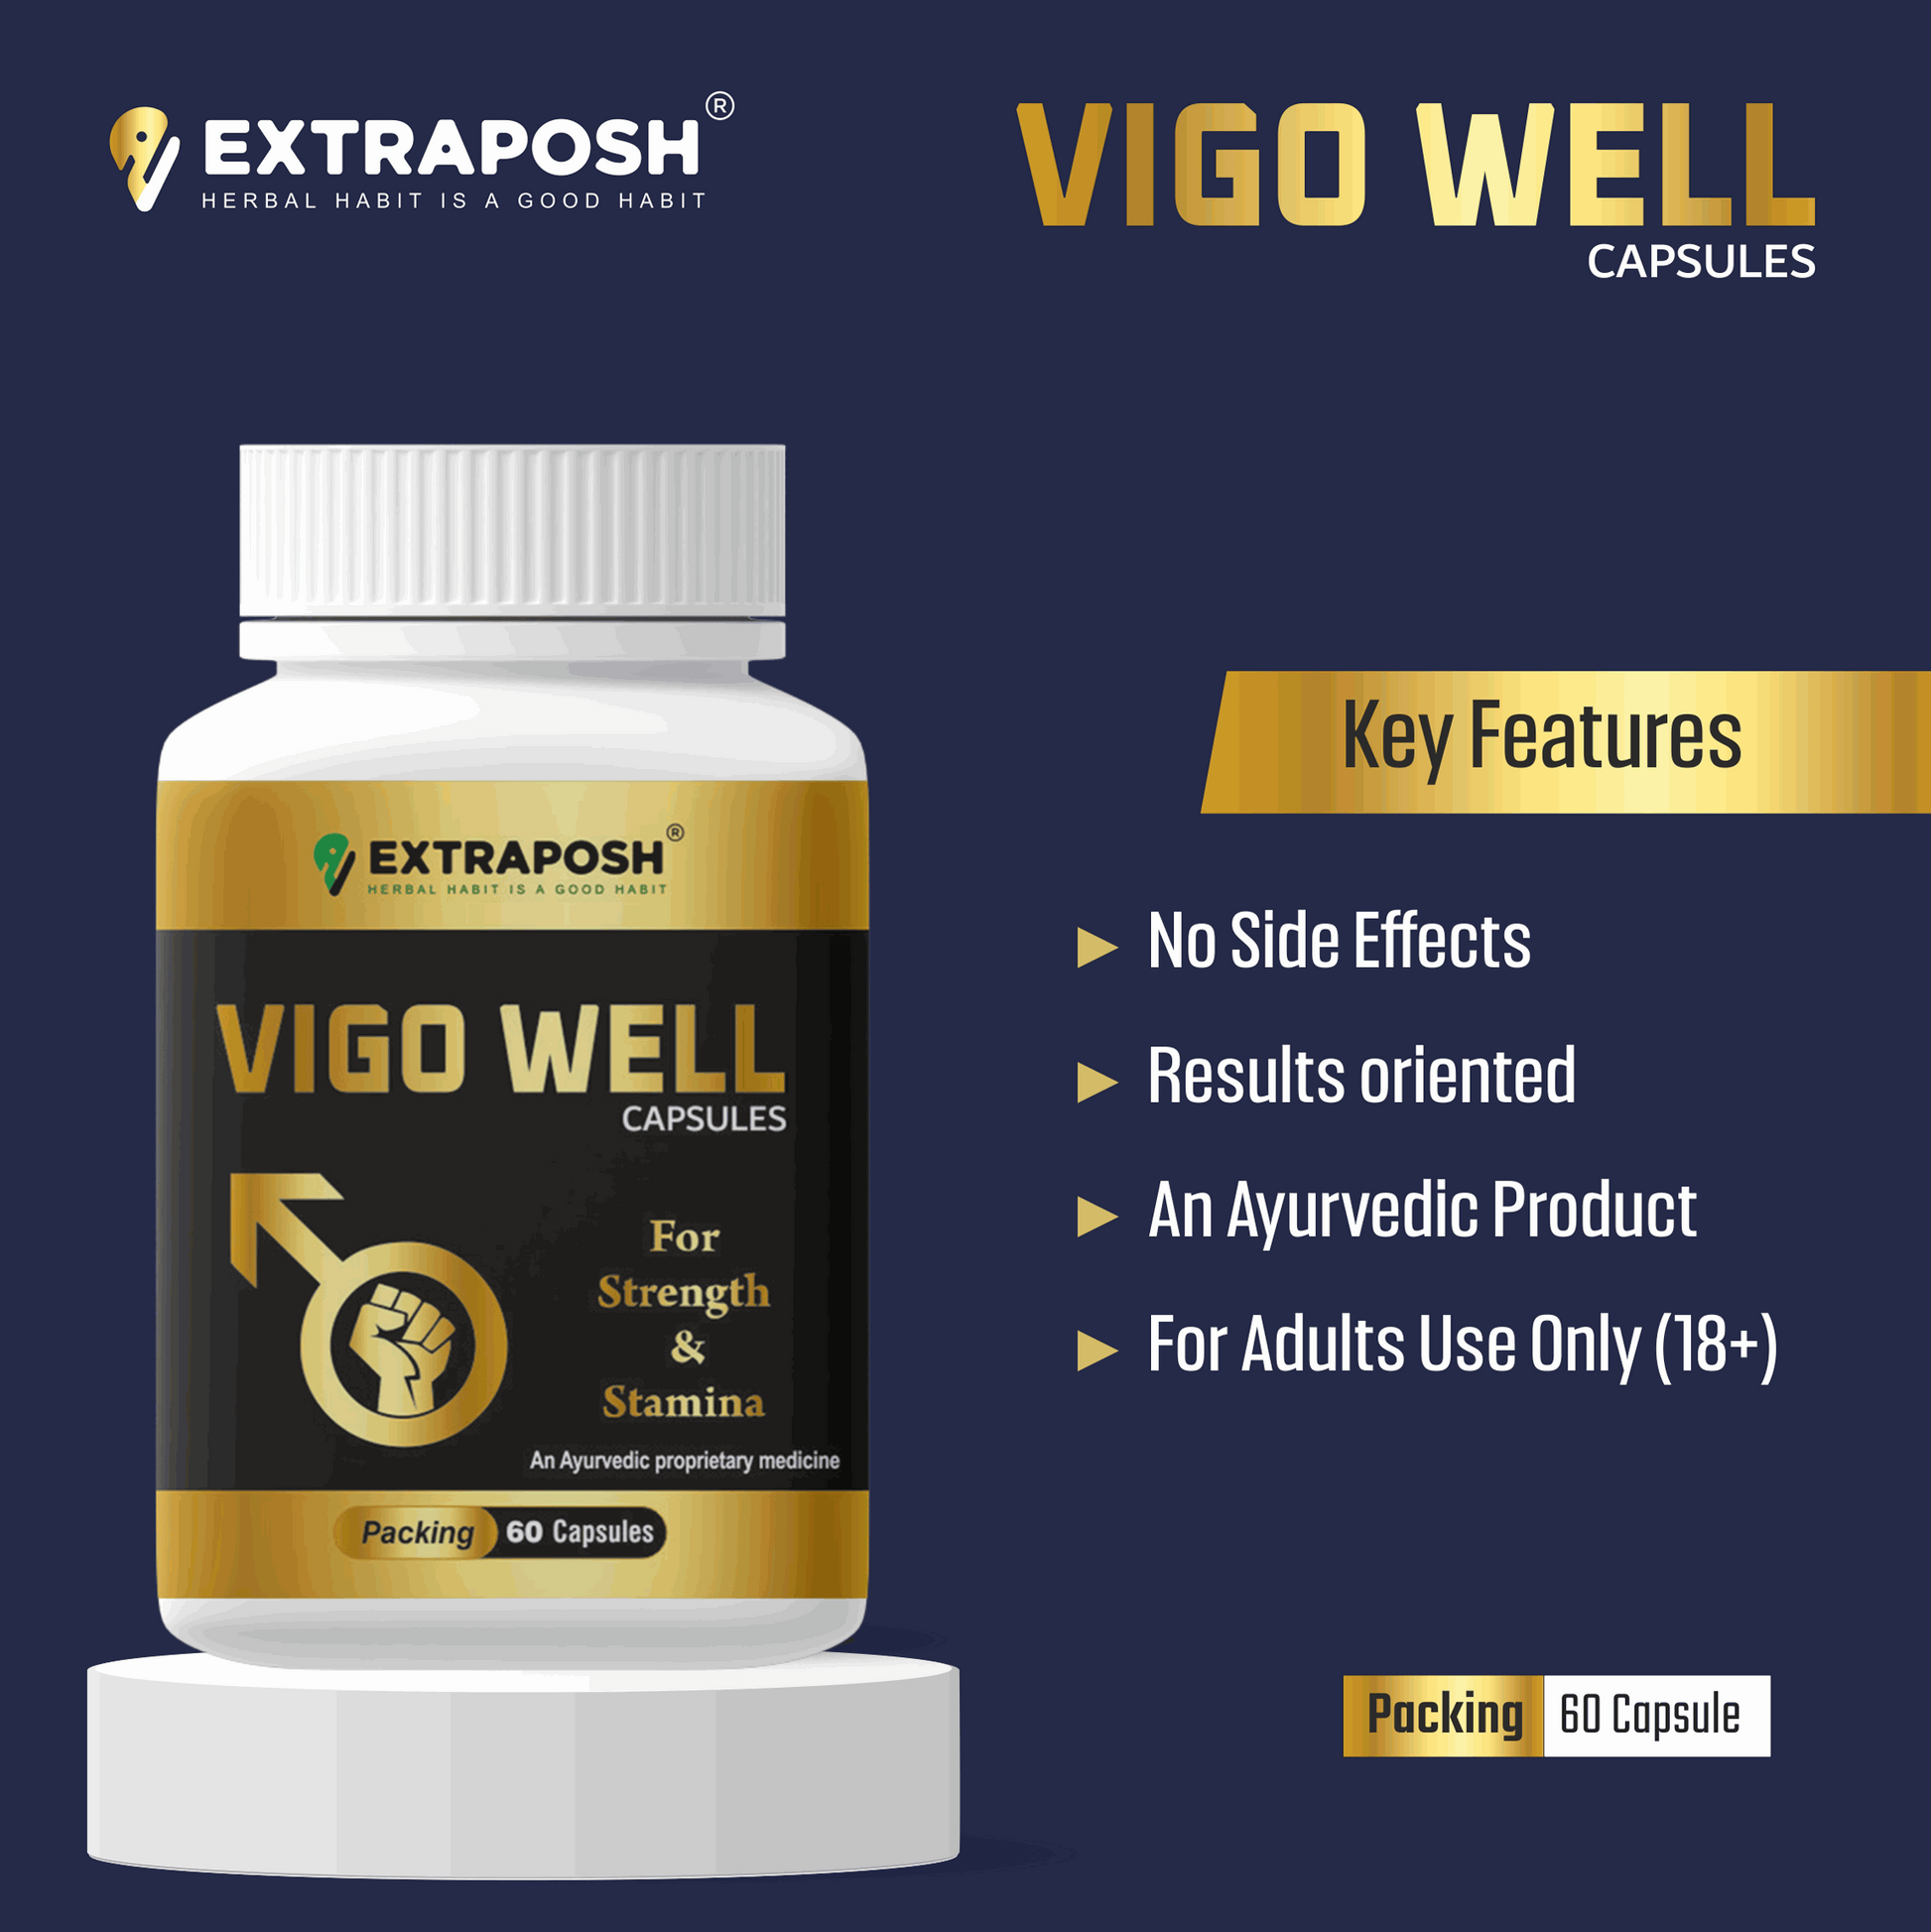 VIGO Well Capsules is Results Oriented Ayurvedic Capsules having no any side effects.